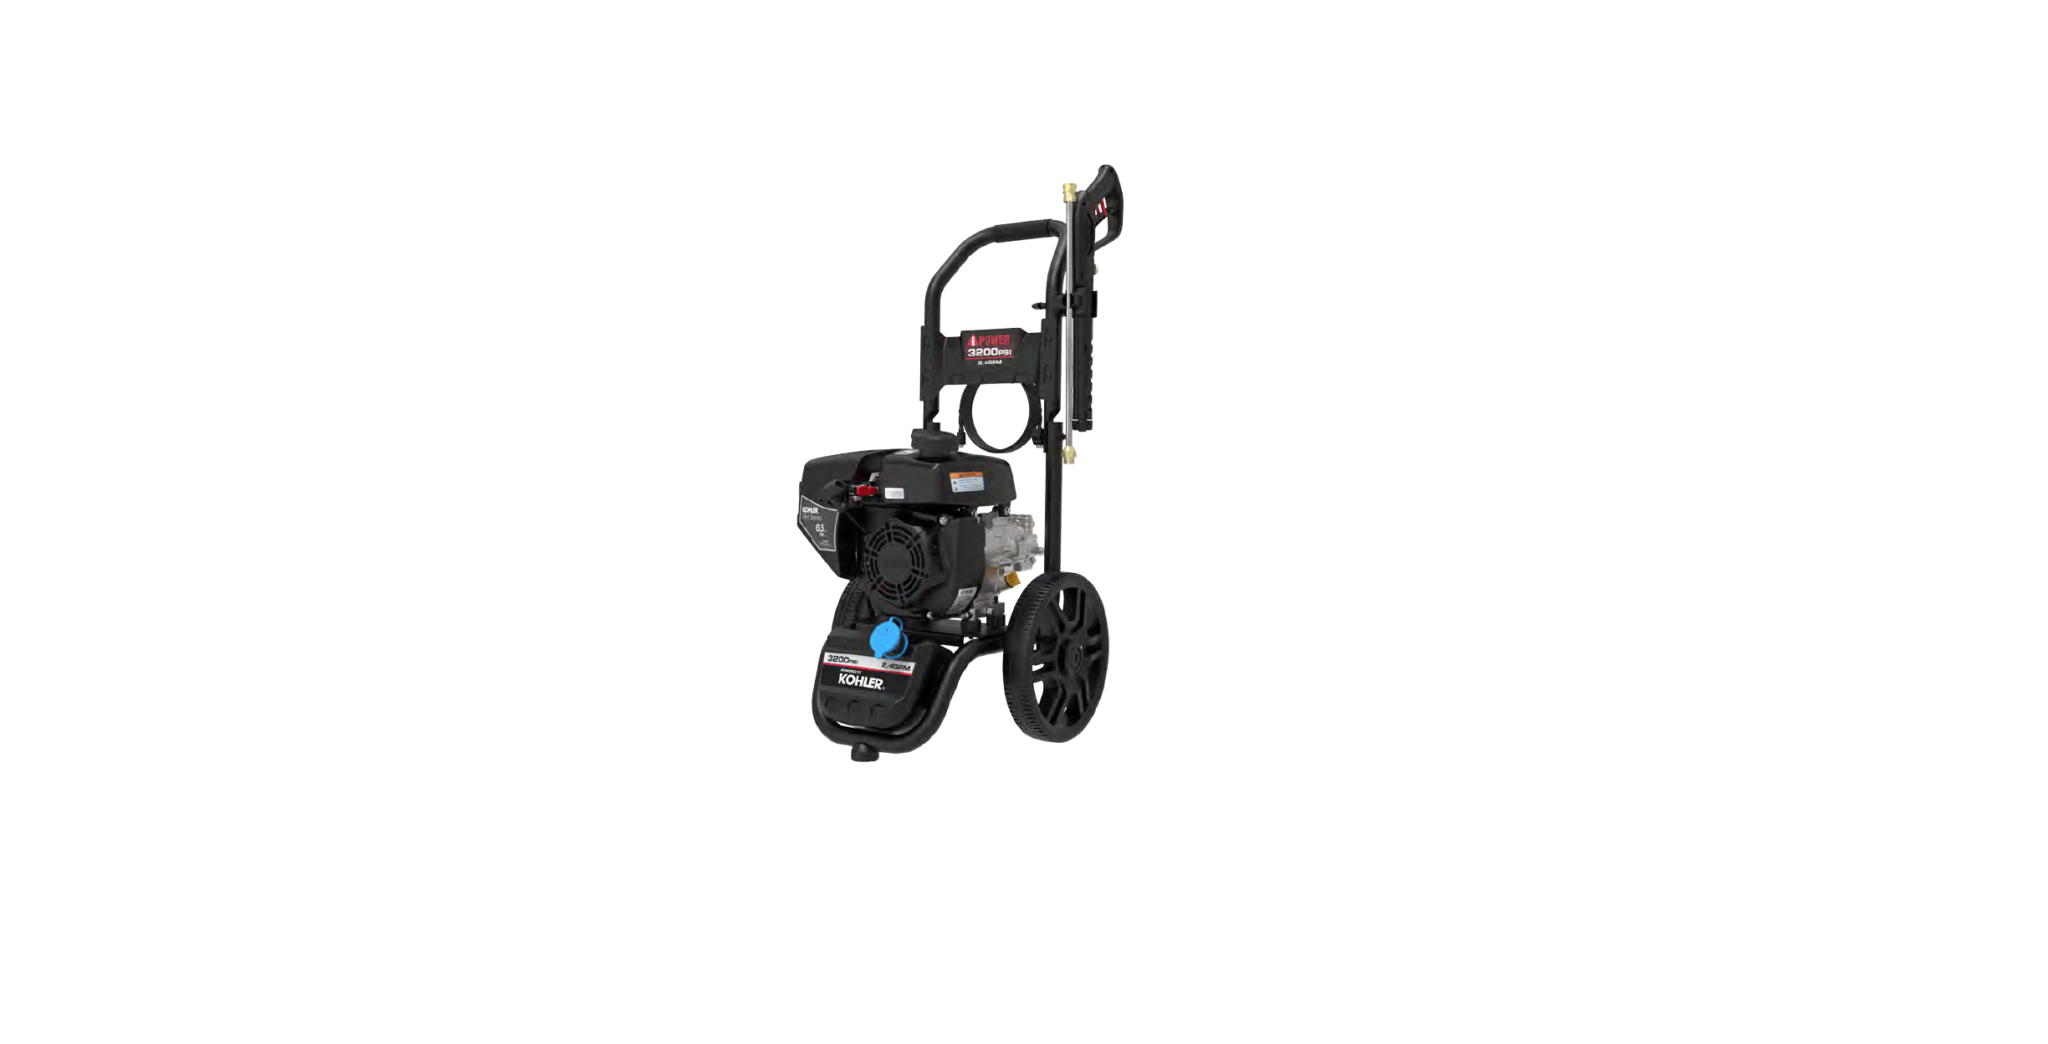 A-iPOWER APW3201KH Pressure Washer